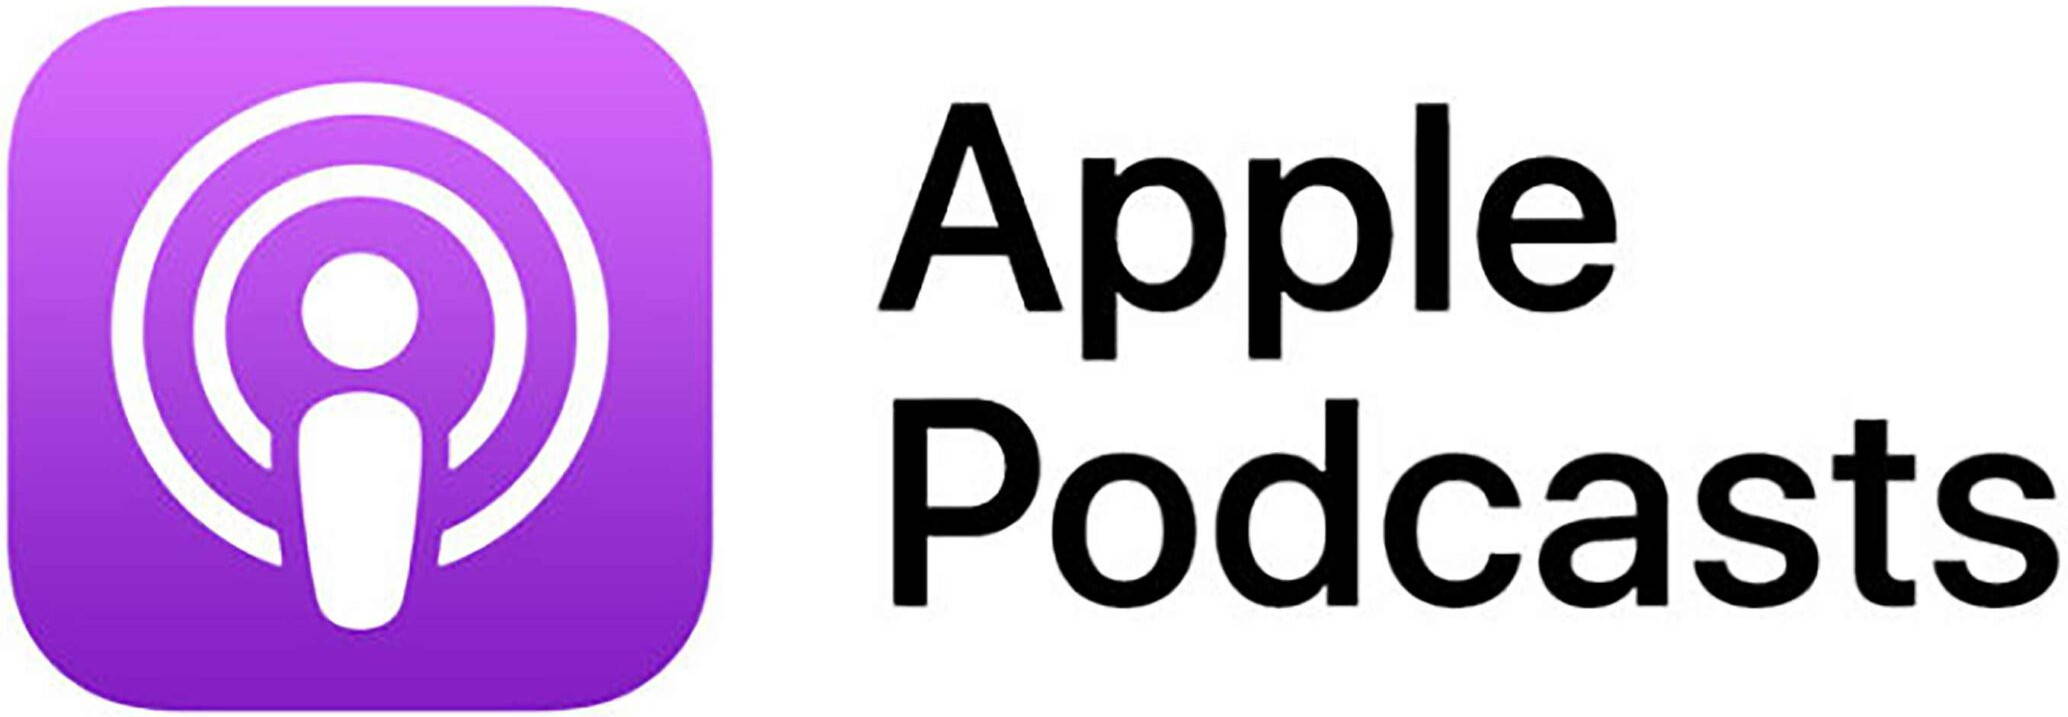 Apple Podcasts Logo to listen to The Preppy Podcast featuring Maxwell and Geraldine co-owners